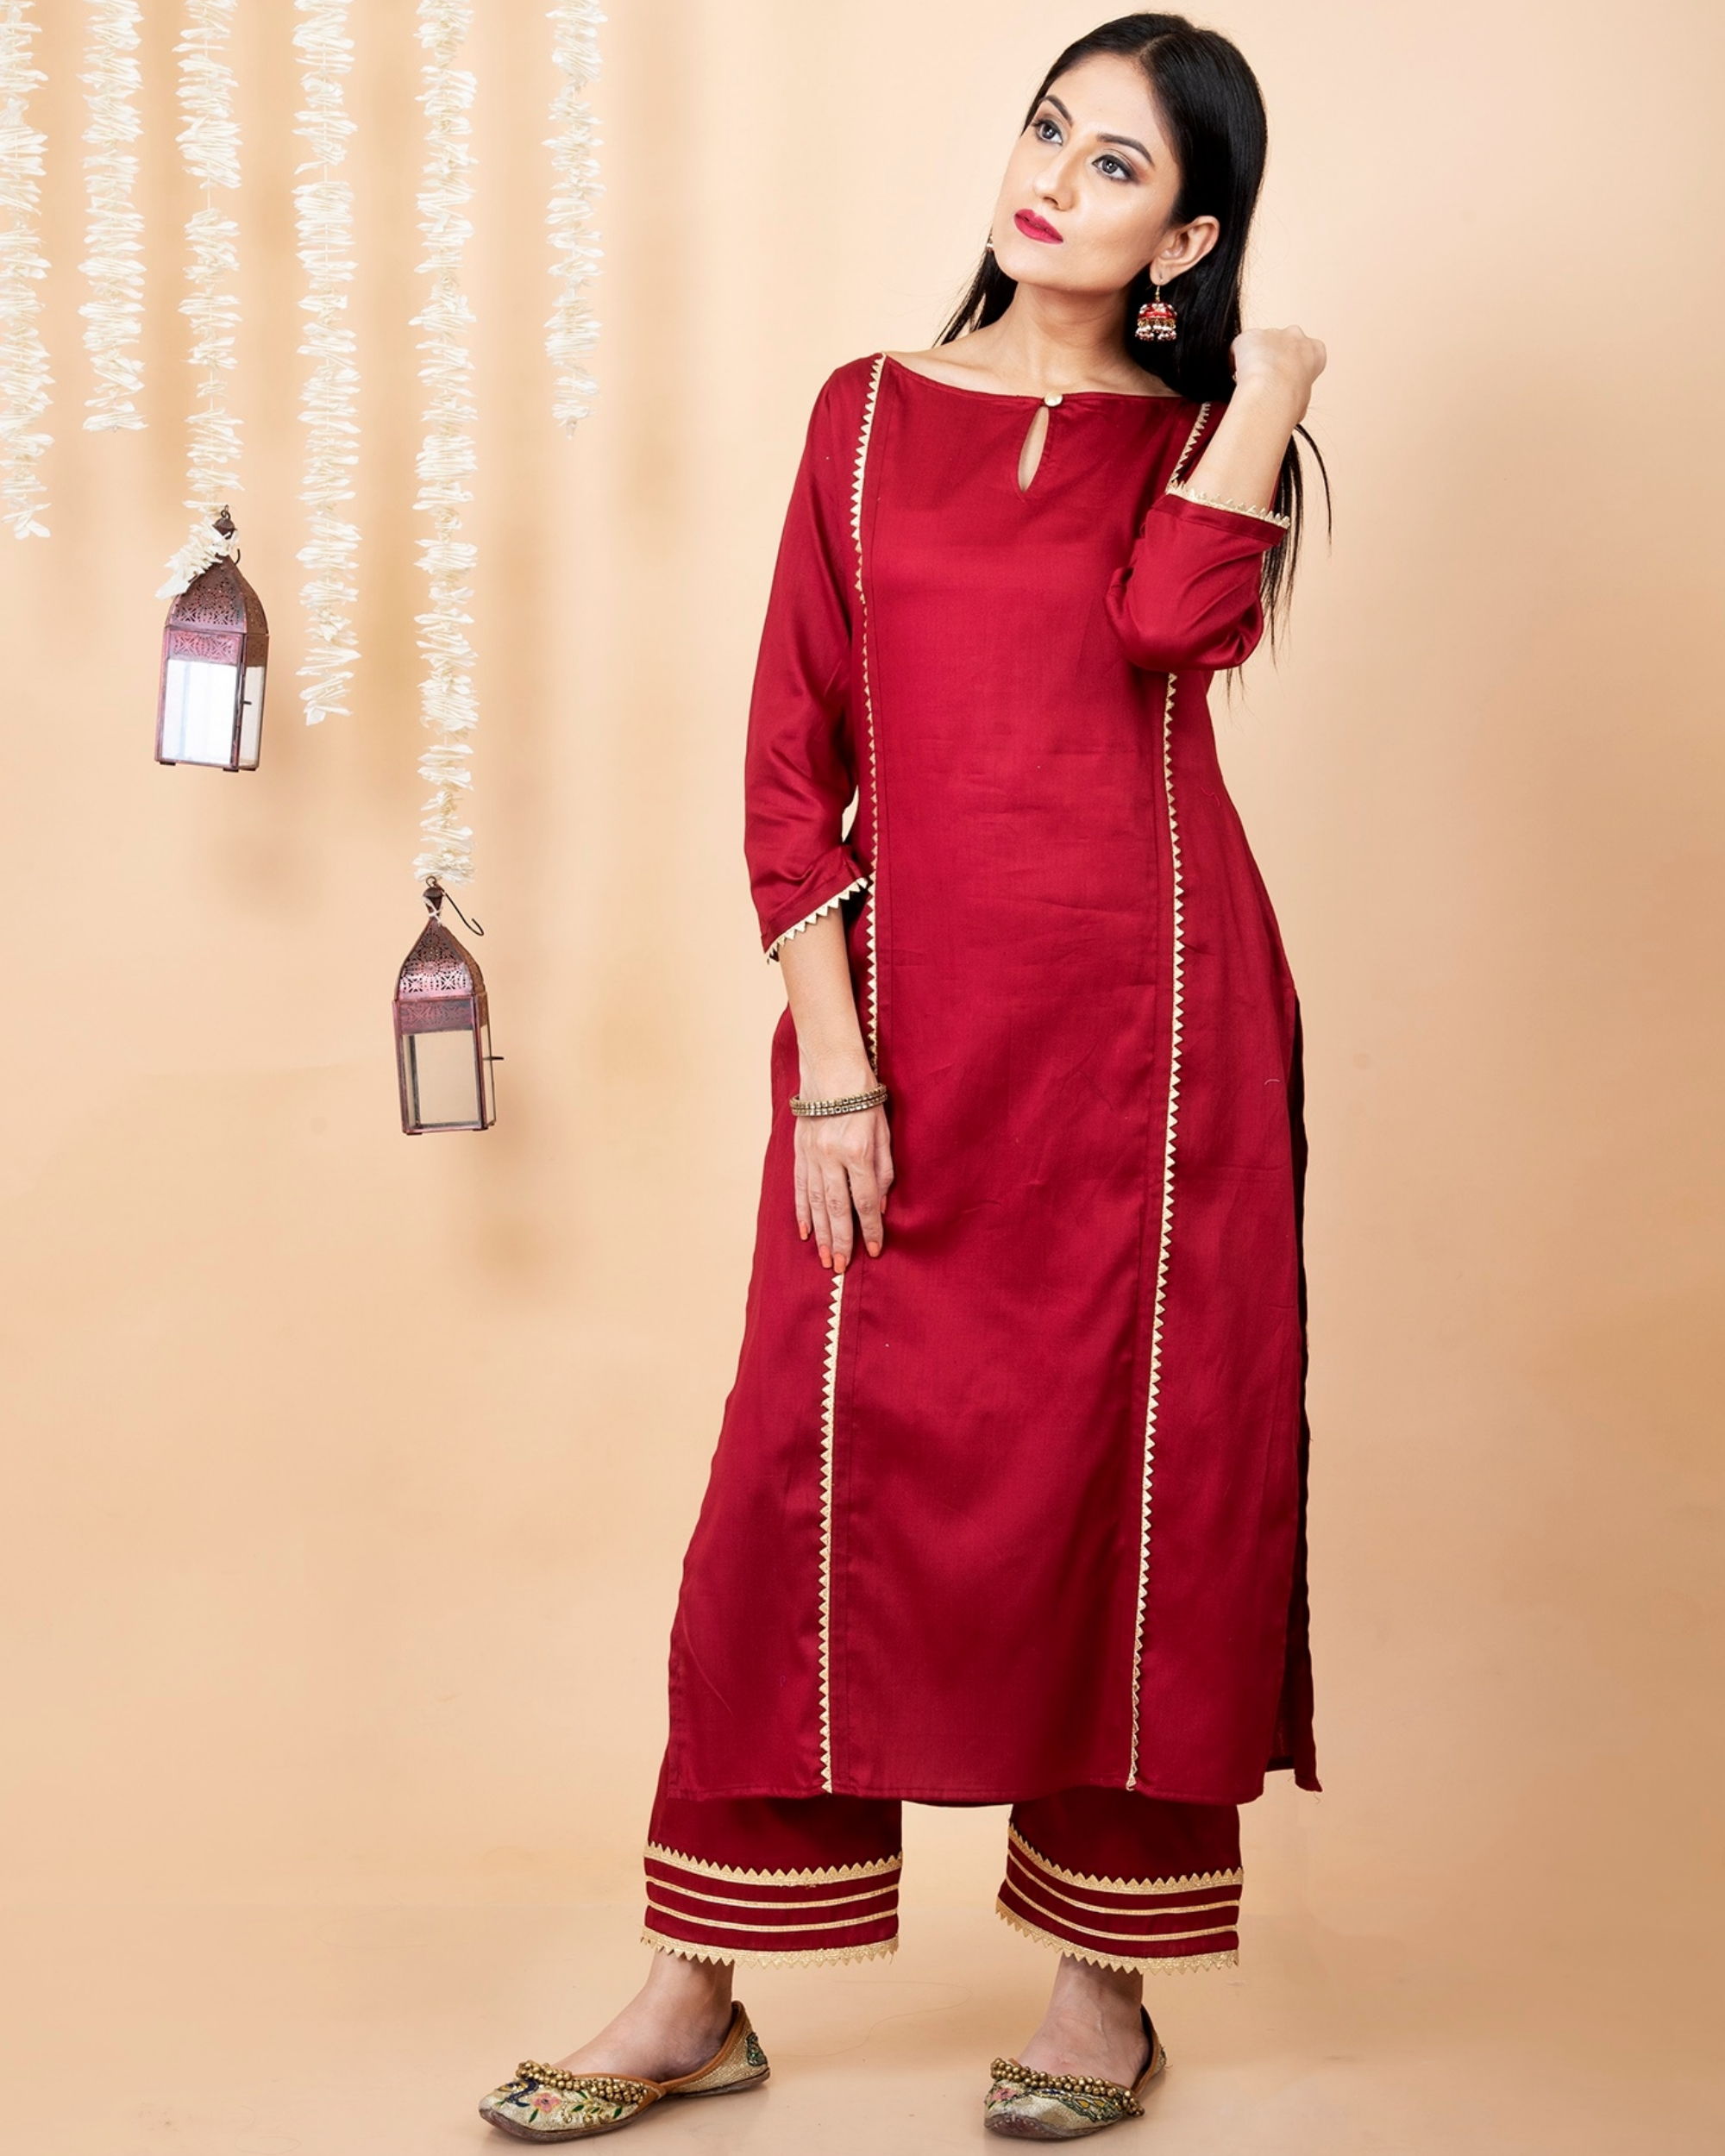 Maroon Kurta With Gold Palazzo Pants  TheStyleasecom